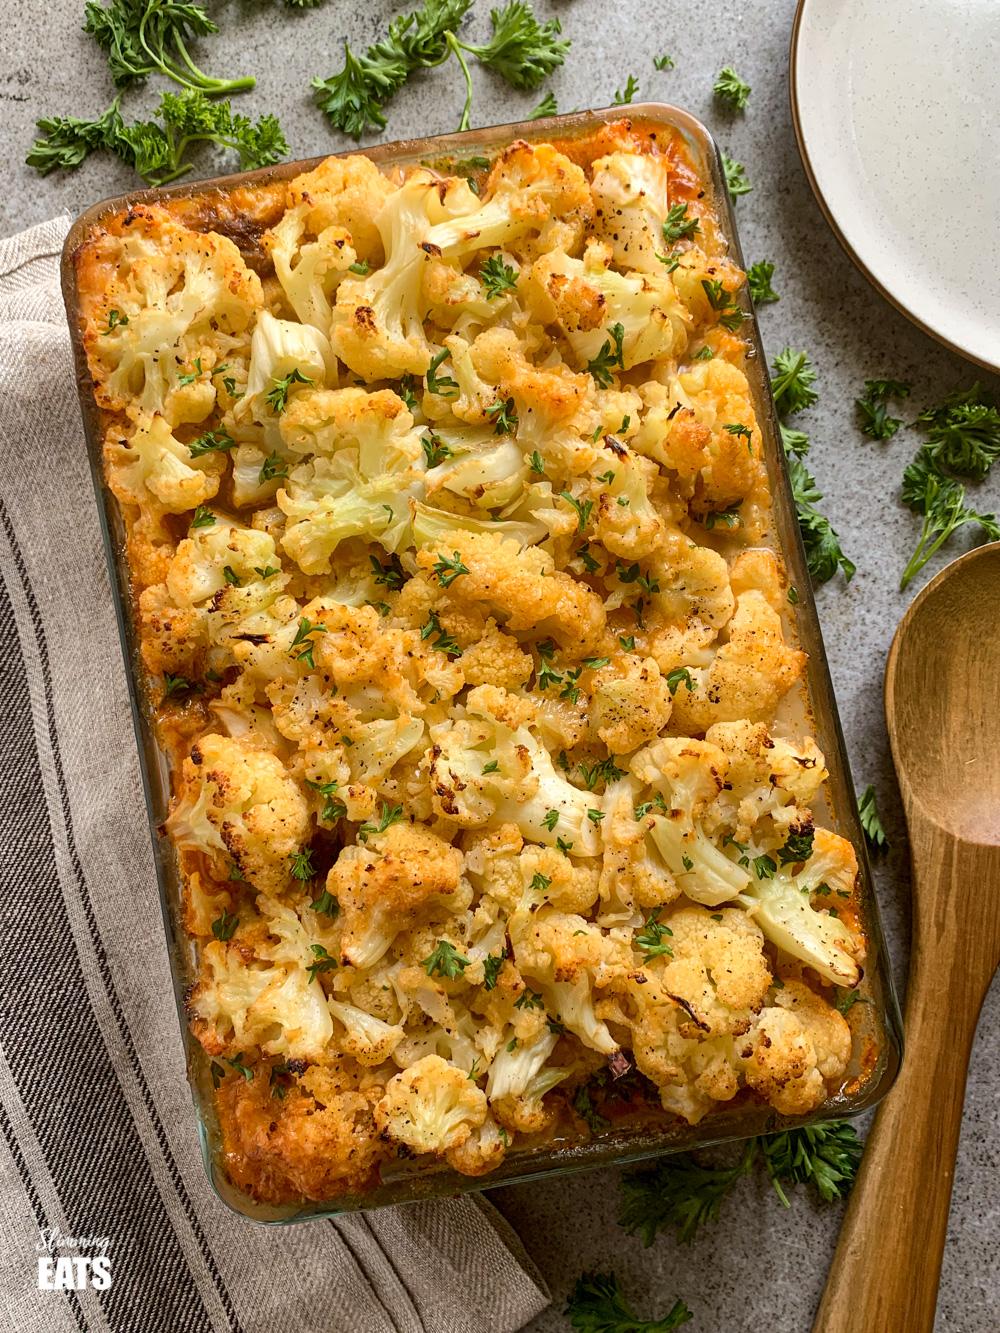 Cheesy Cauliflower Topped Pie in a glass oven dish on board with wooden spoon to the right